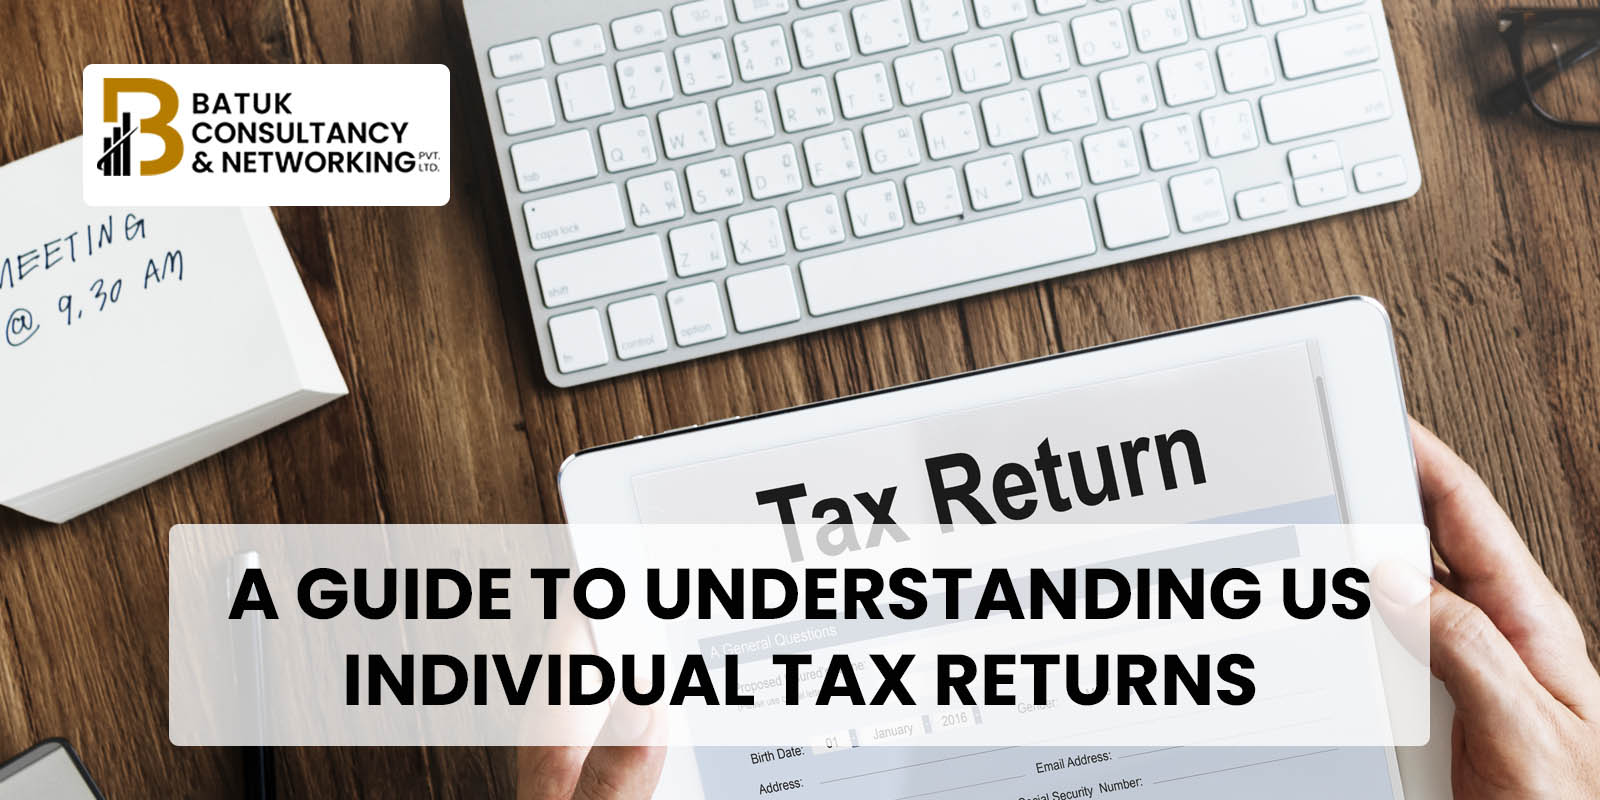 A Guide to Understanding US Individual Tax Returns